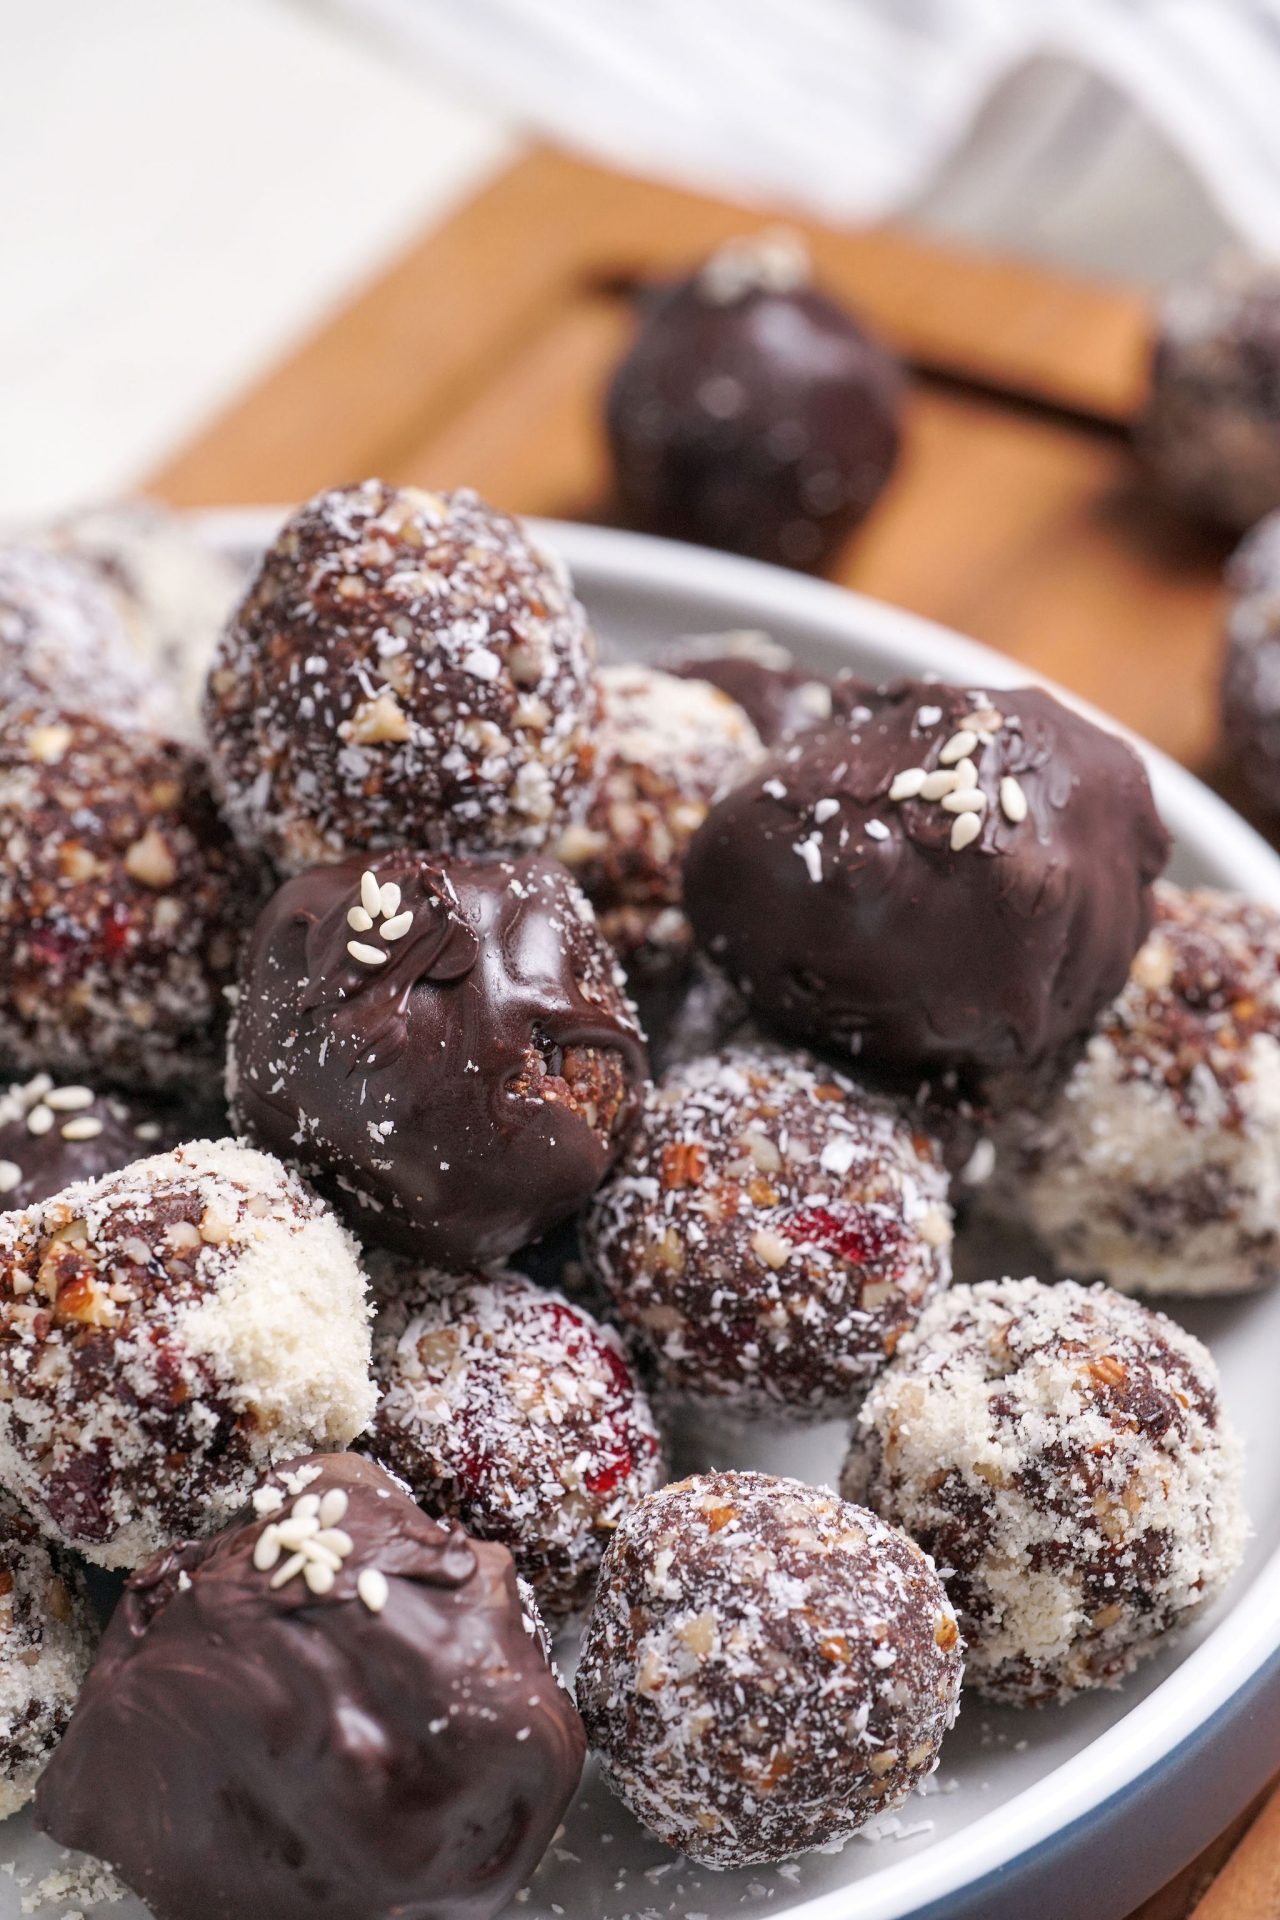 Plate of bliss ball truffles made with cranberries, dates and cacao powder, covered in melted dark chocolate